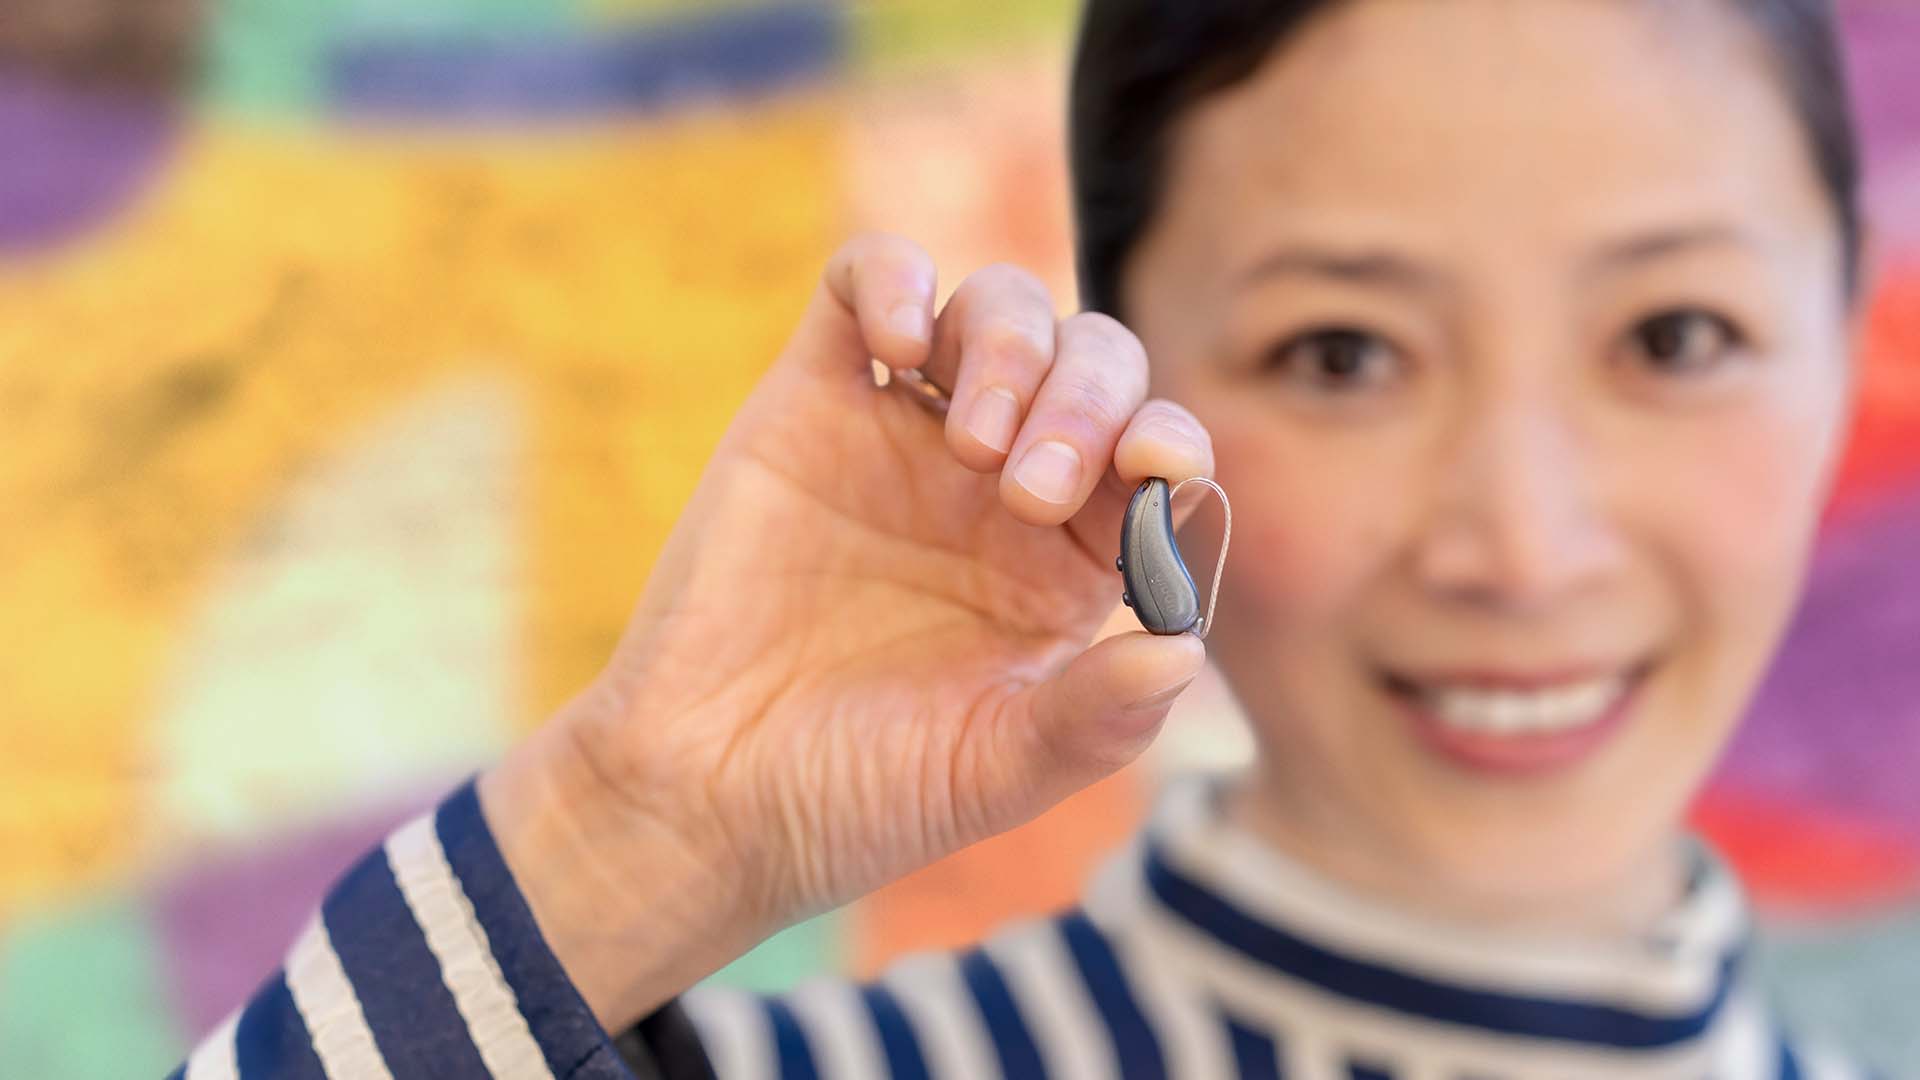 Artist holding Pure Charge&Go IX hearing aids